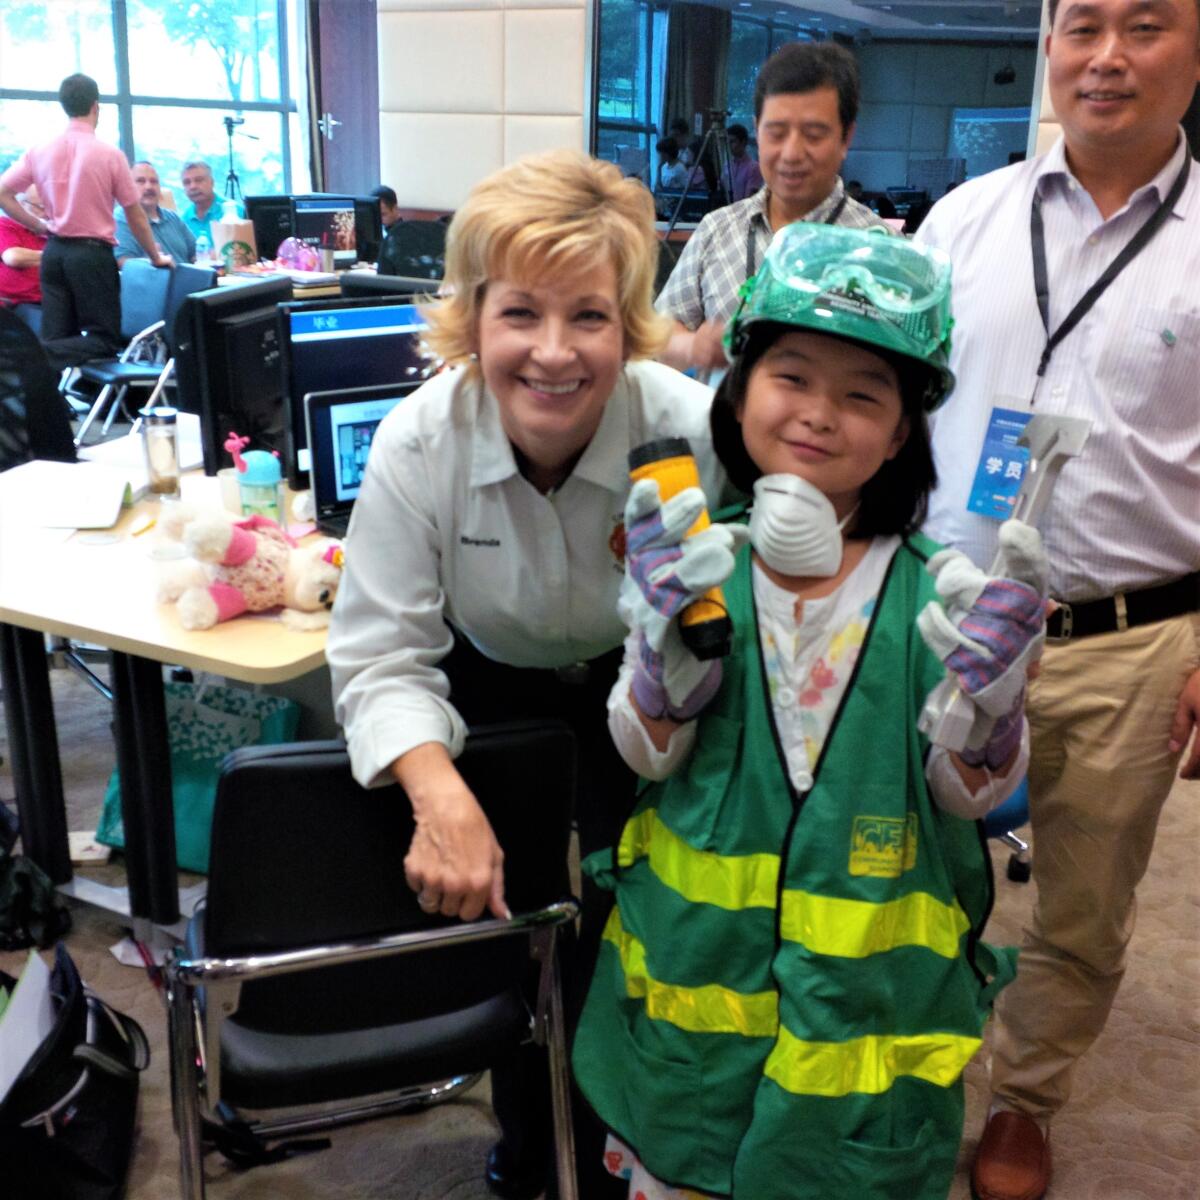 Brenda Emrick traveled to China in 2015 to train leaders to build Community Emergency Response Team (CERT) programs abroad.